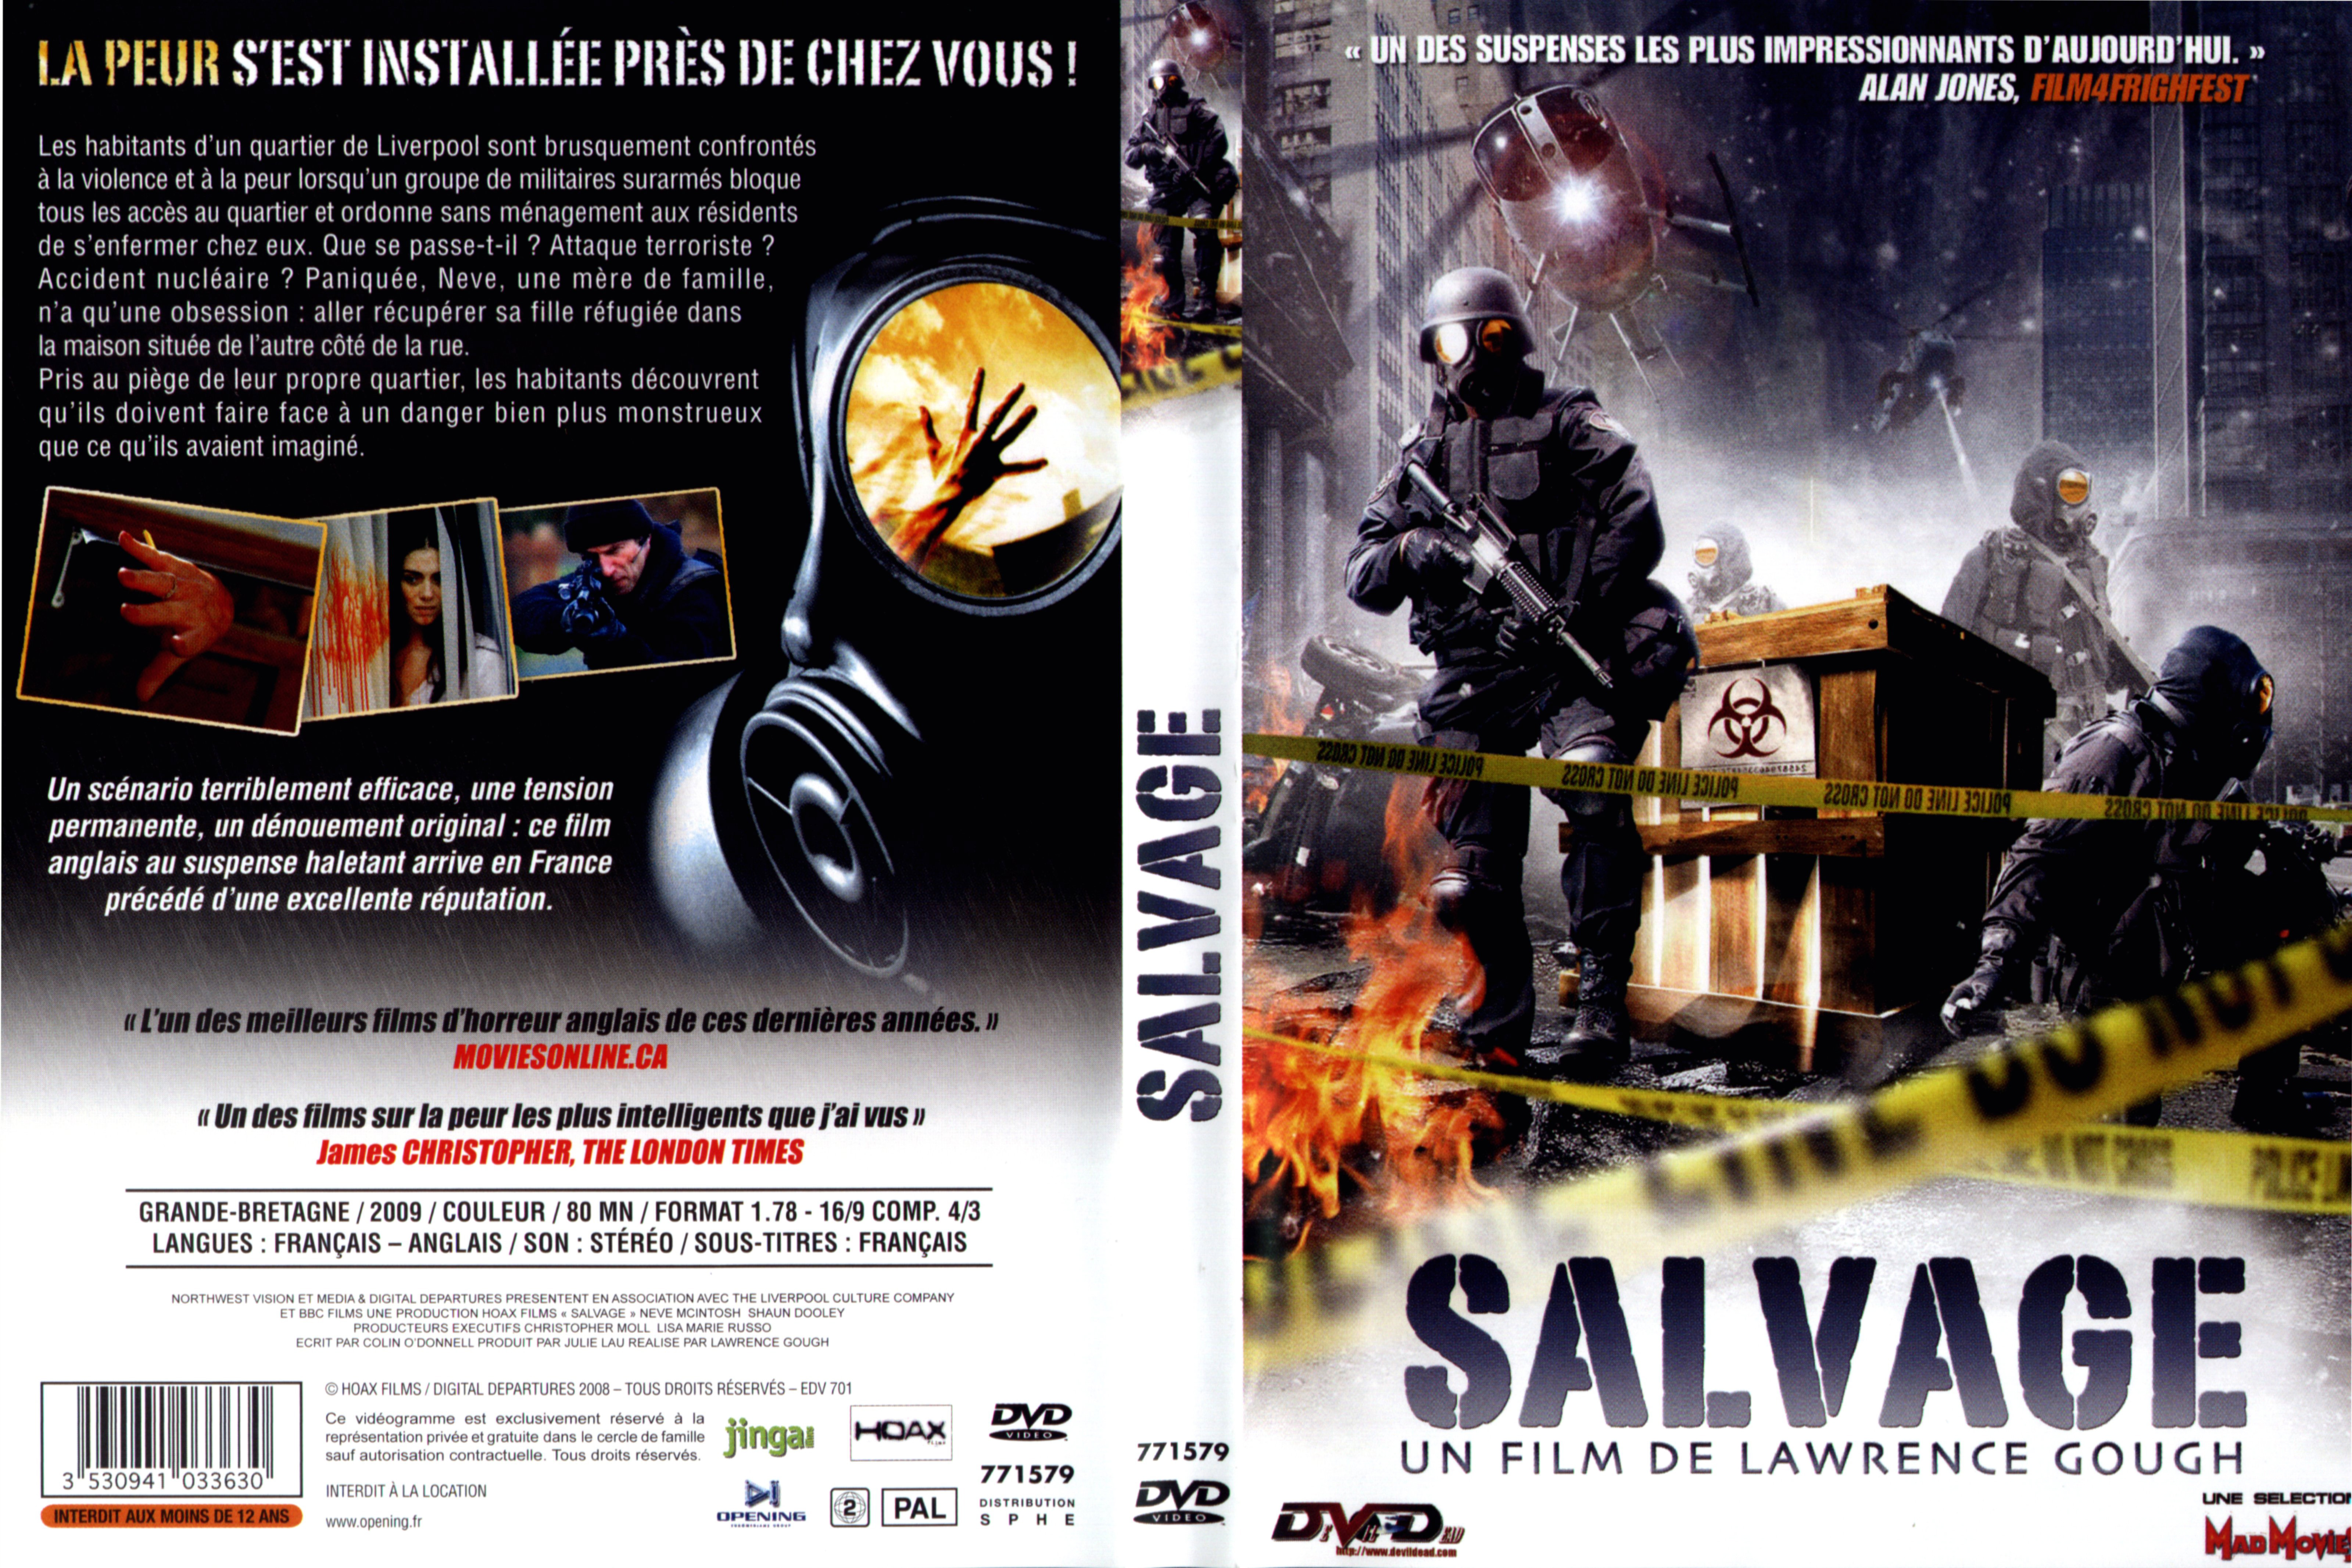 Jaquette DVD Salvage